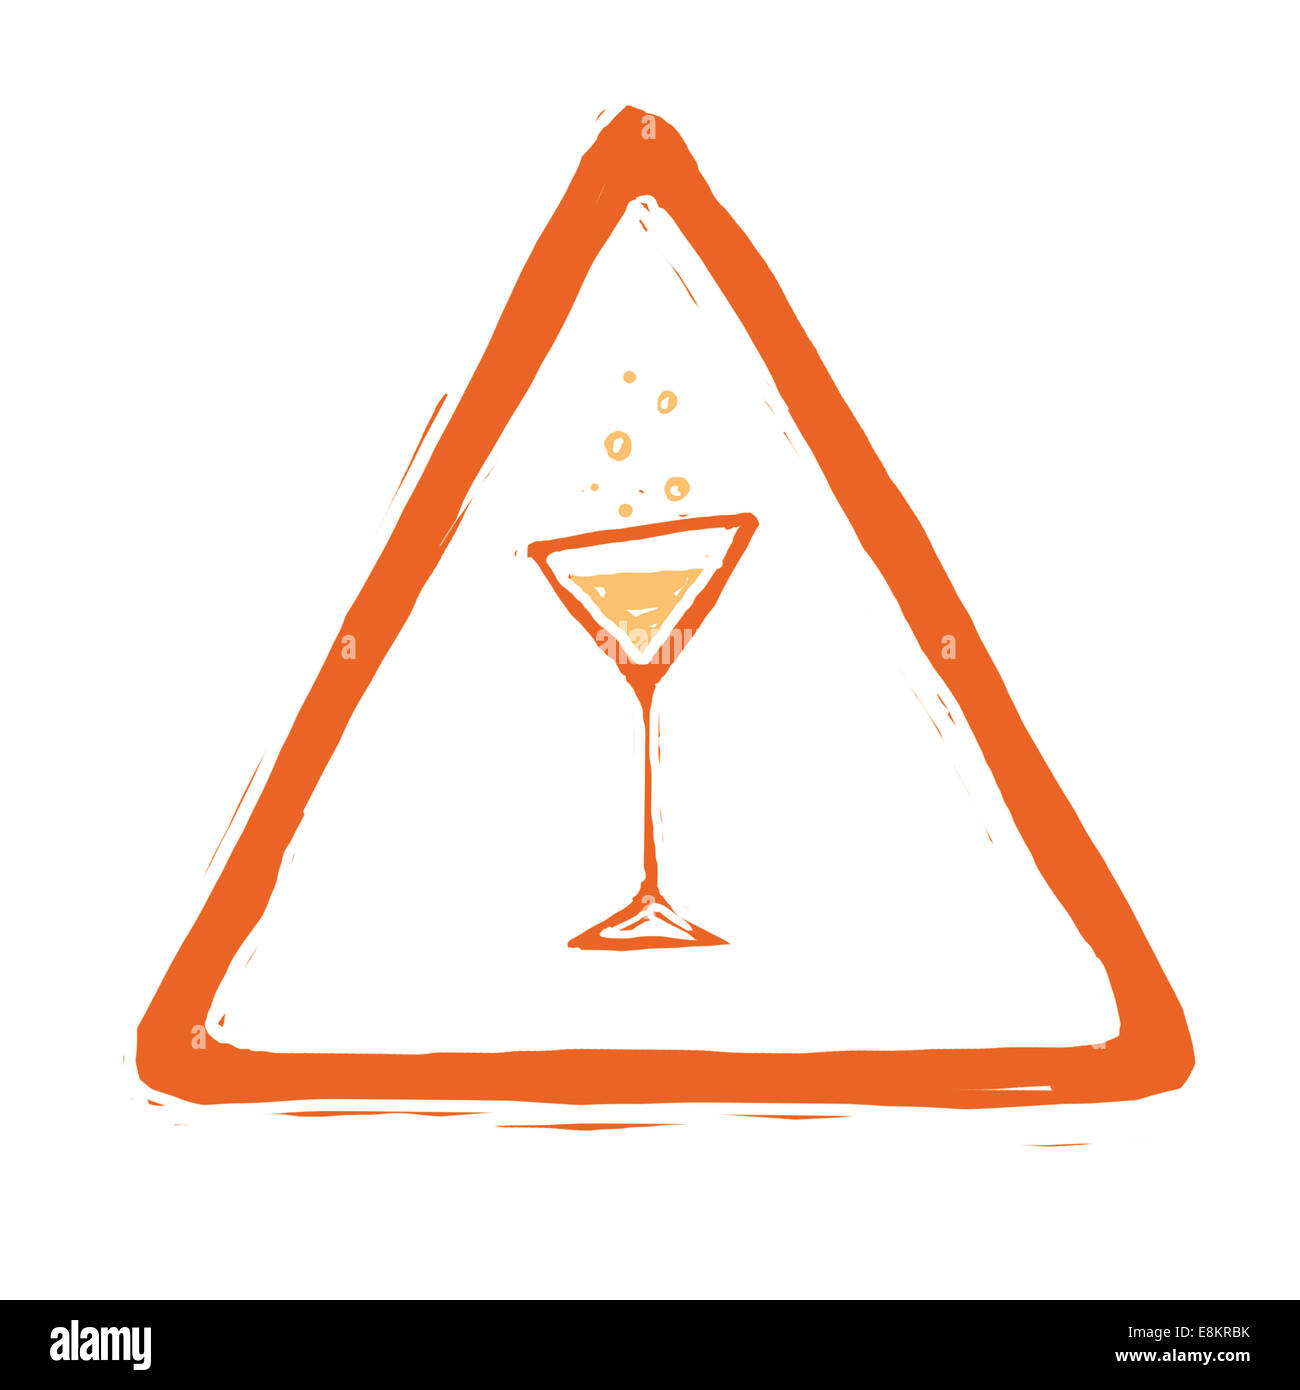 Pictogram illustrating the dangers of alcohol. Stock Photo